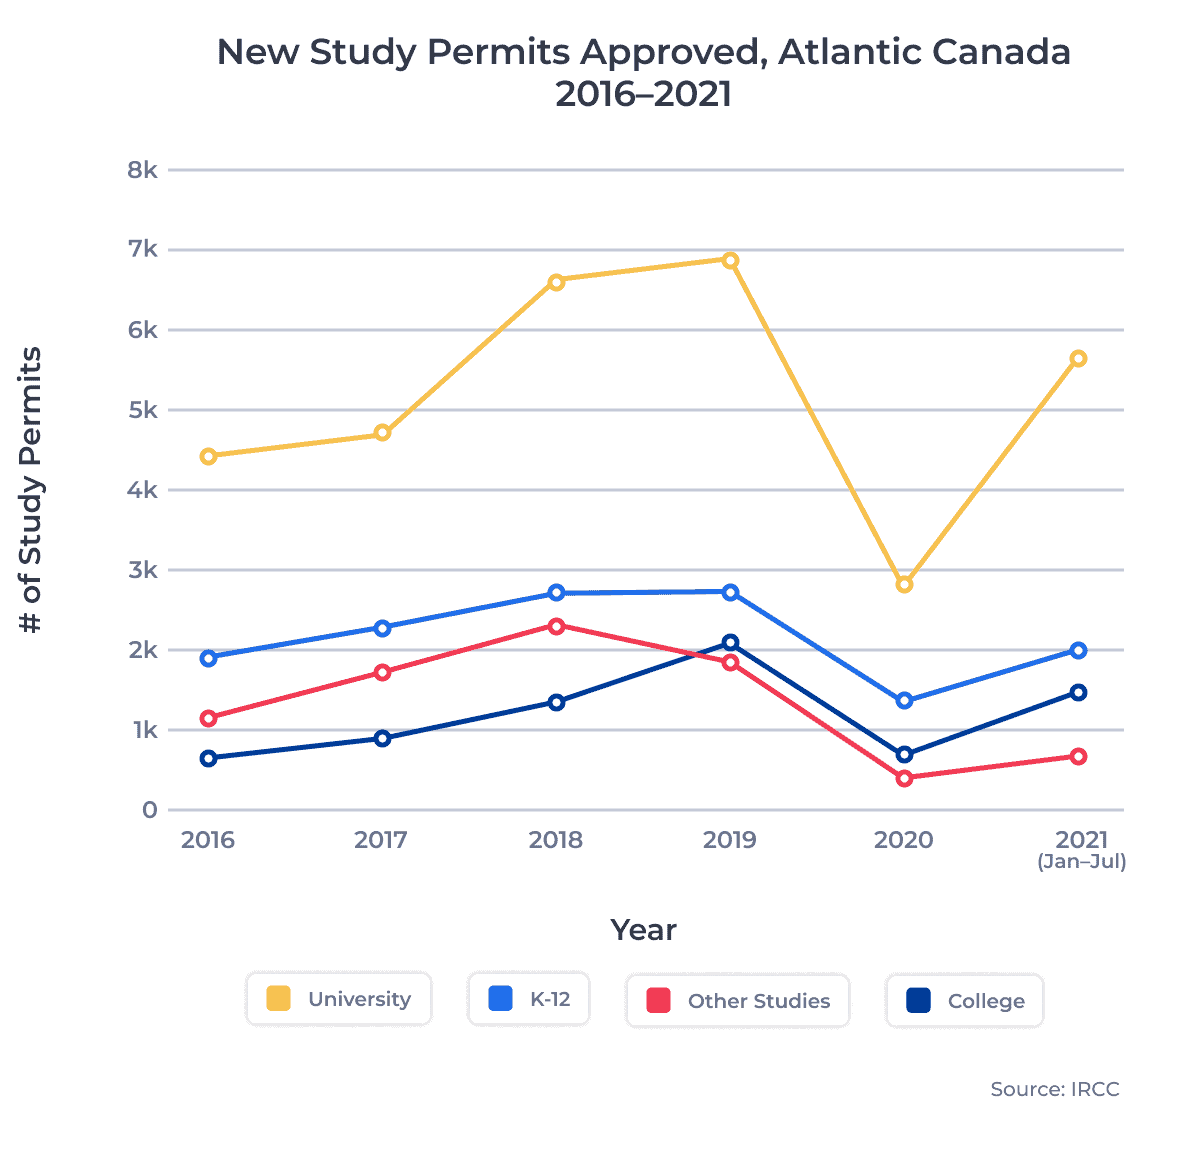 A line chart showing new study permits approved, Atlantic Canada, 2016 to 2021